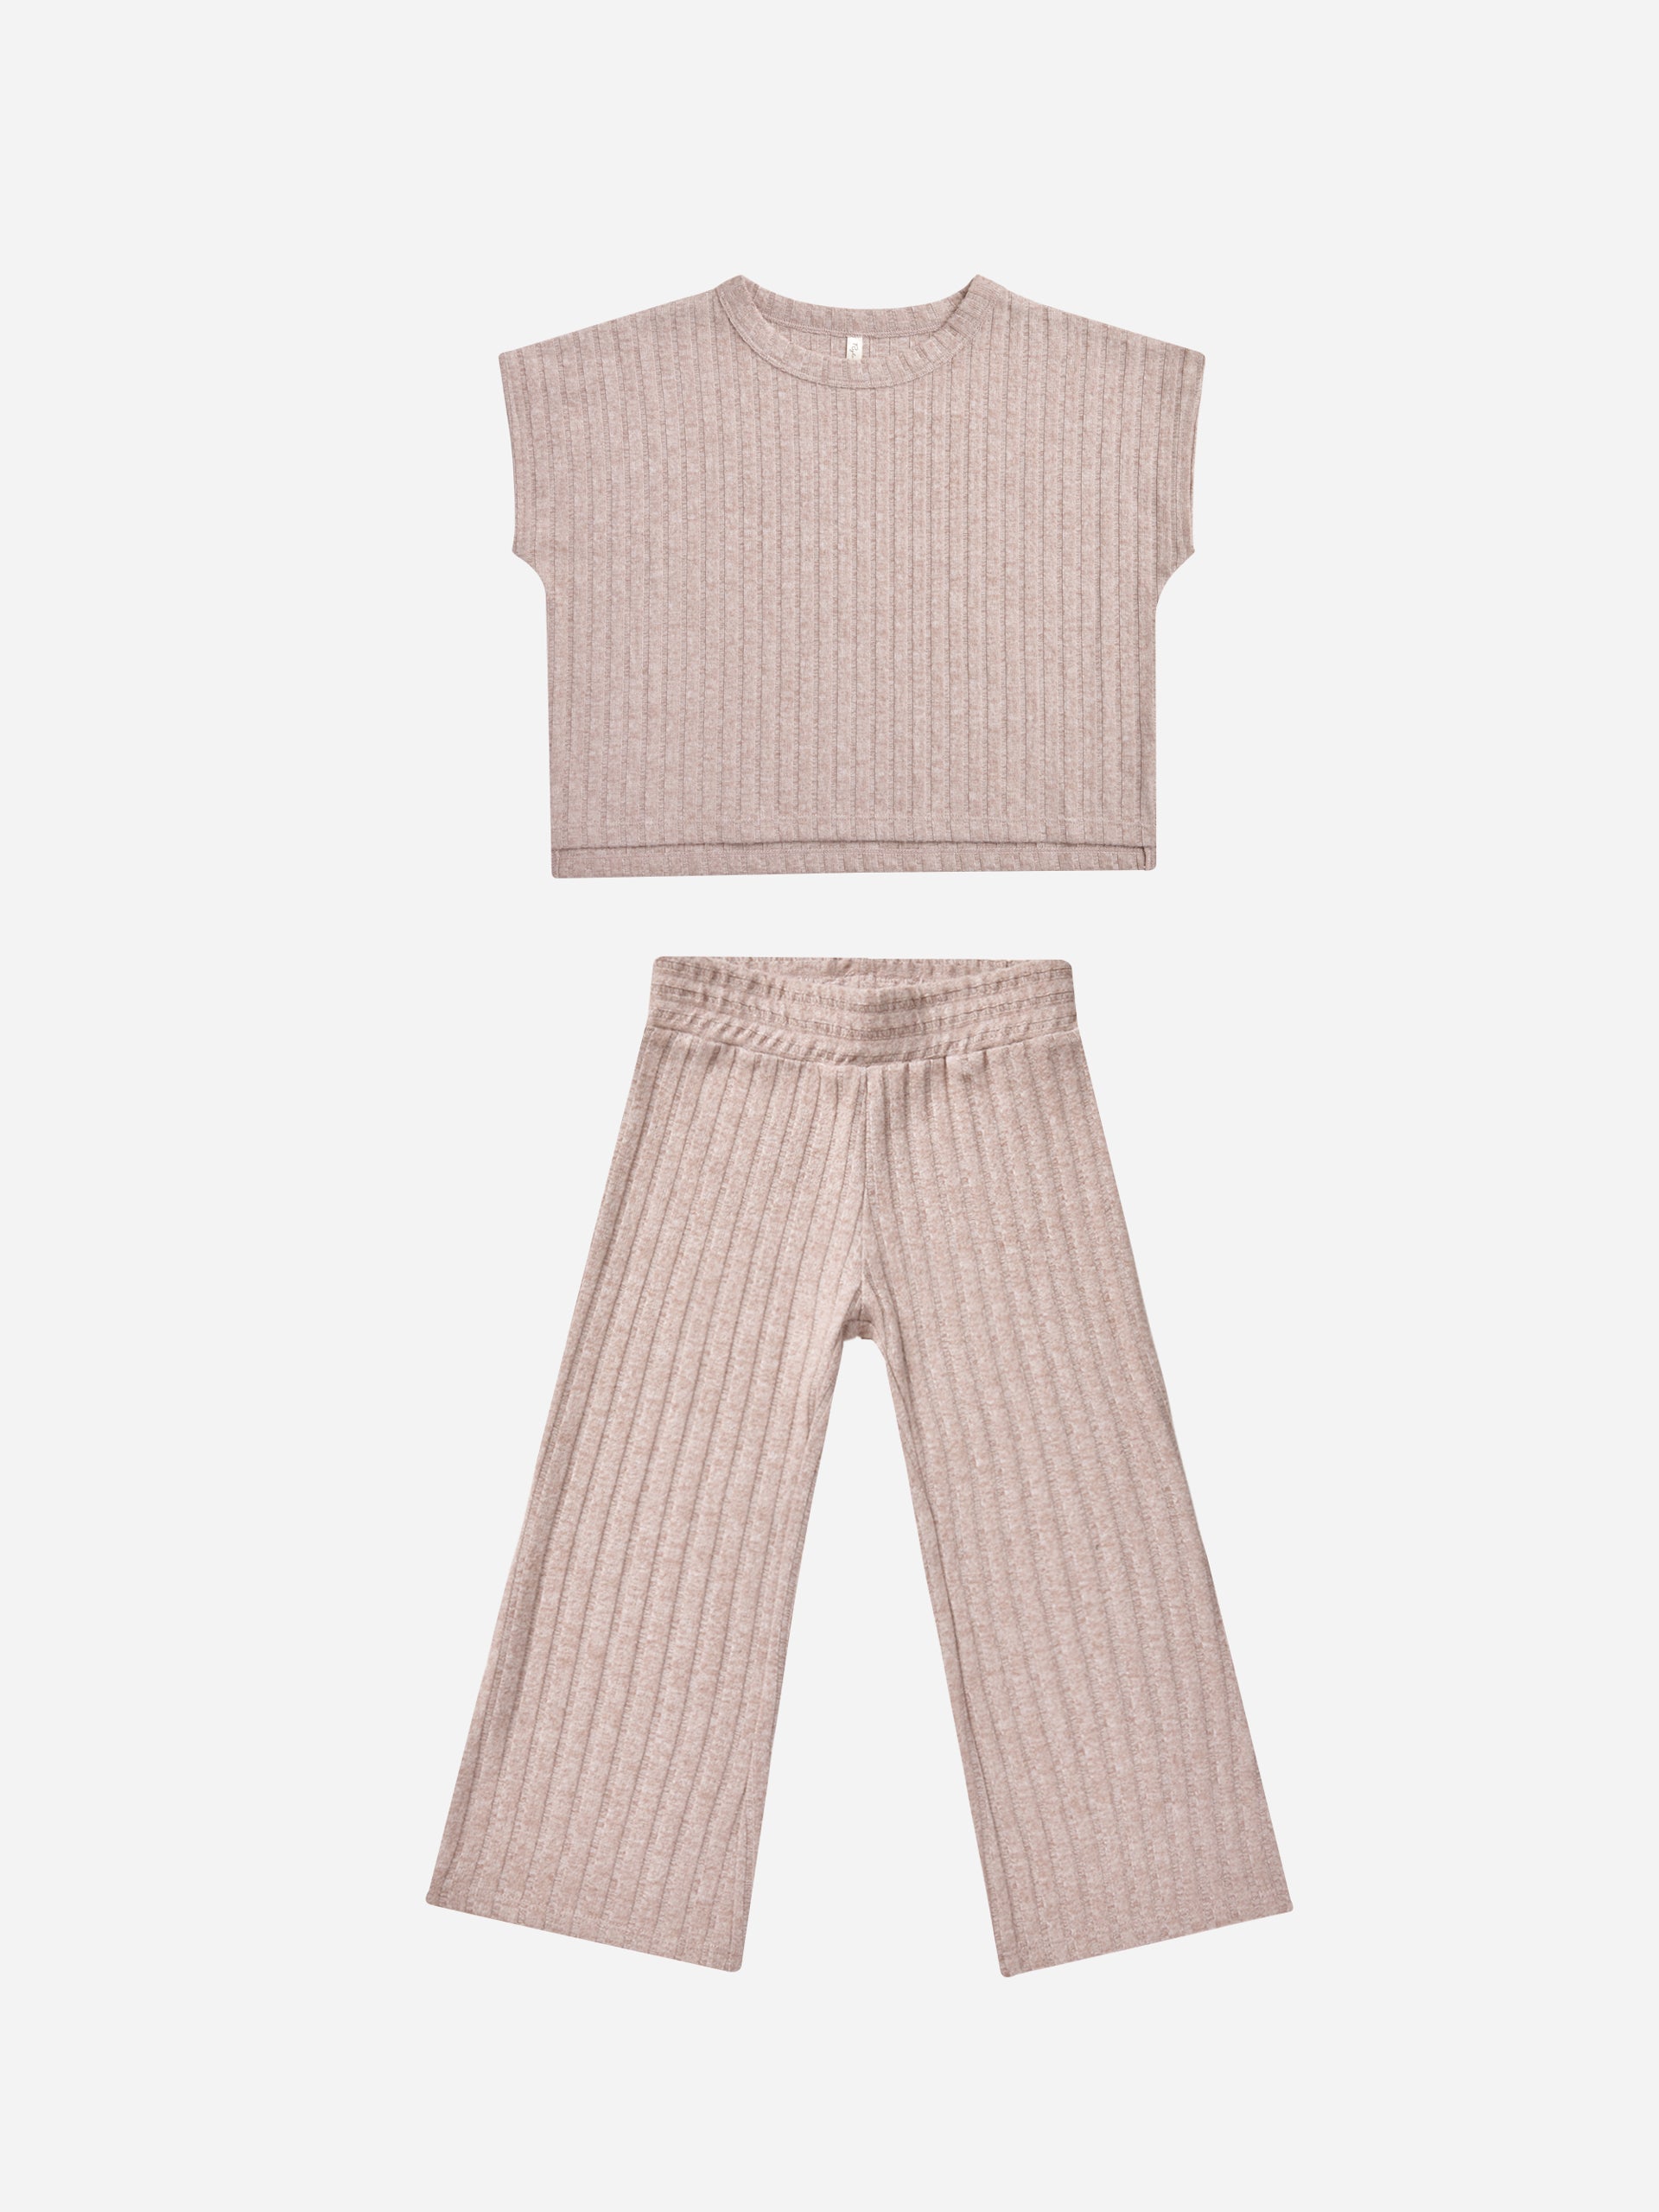 Cozy Rib Knit Set || Heathered Mauve - Rylee + Cru | Kids Clothes | Trendy Baby Clothes | Modern Infant Outfits |